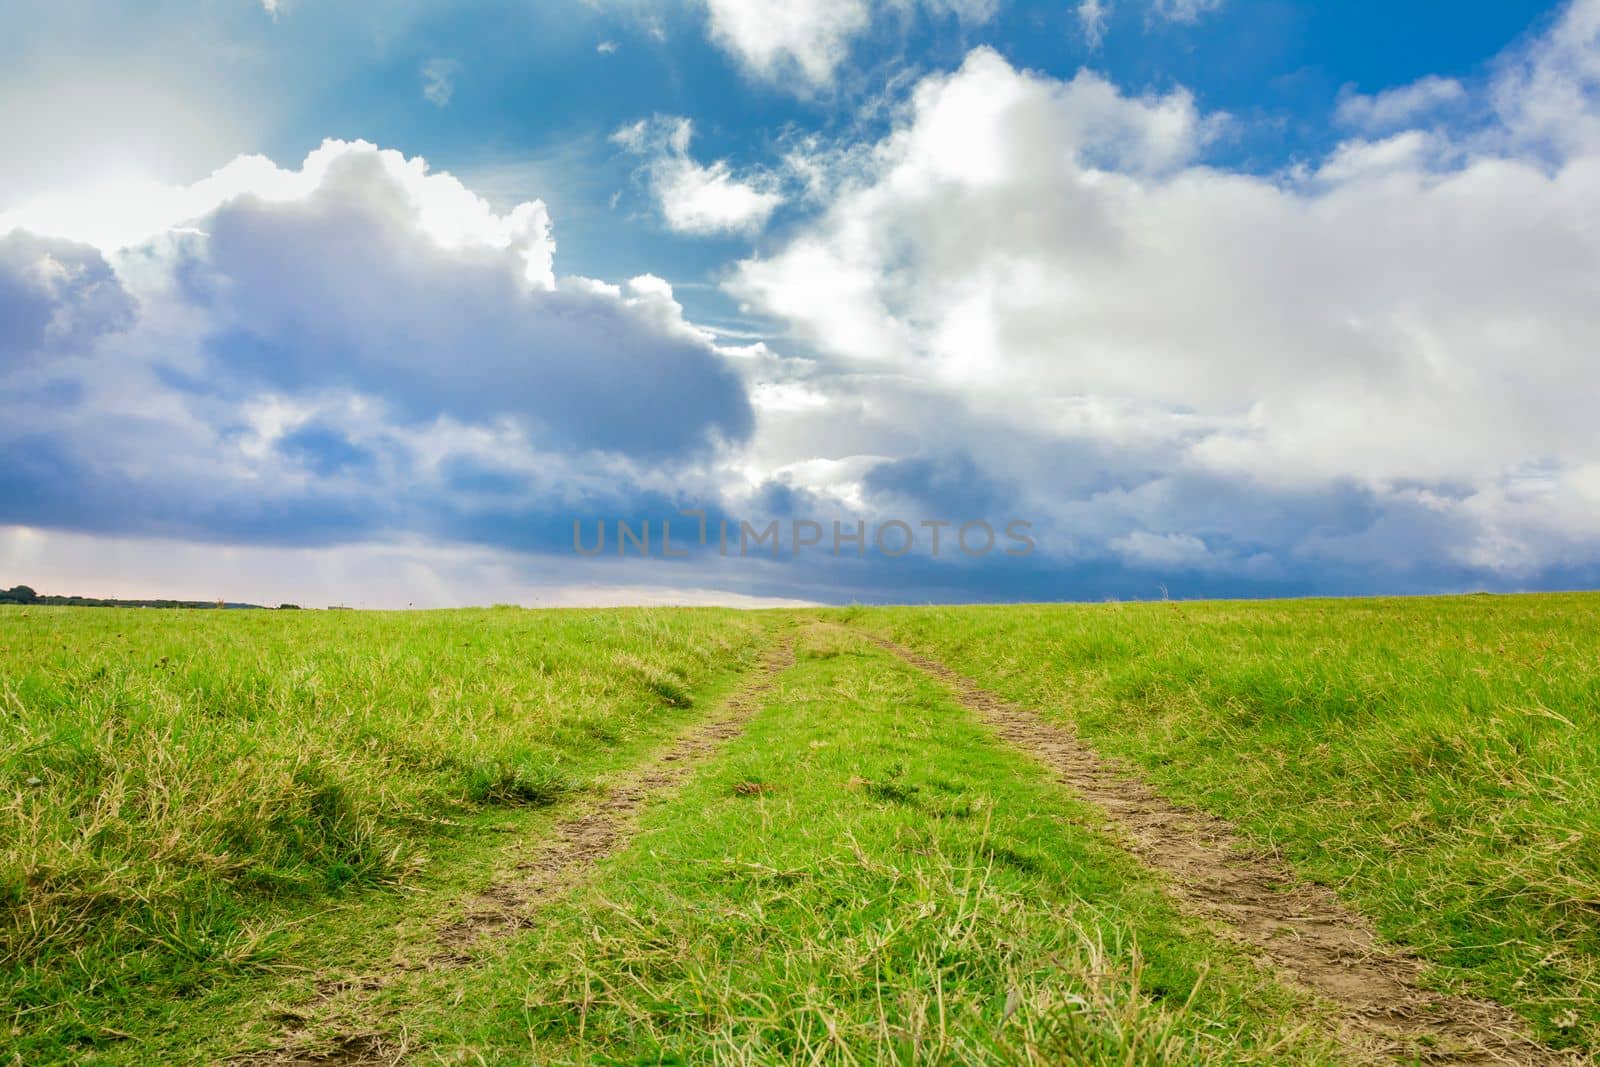 Green country road with clouds in the background. Idyllic view of rural road between green fields with blue sky and clouds, Landscape of a green path with clouds and blue sky in the background